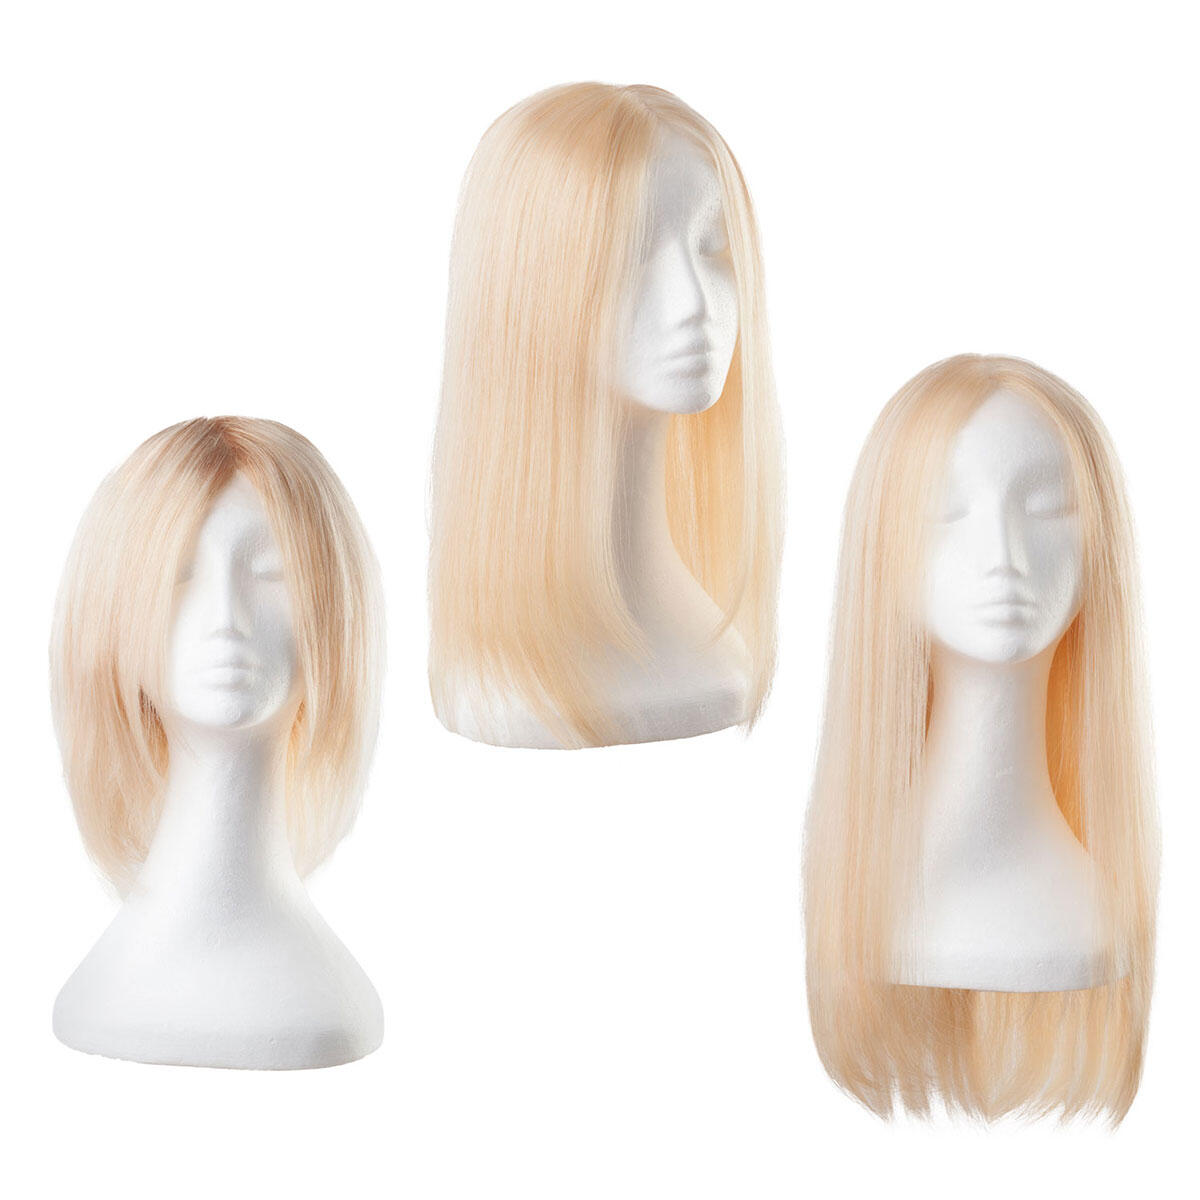 Lace Wig Human Hair 10.6 Blonde 30 cm